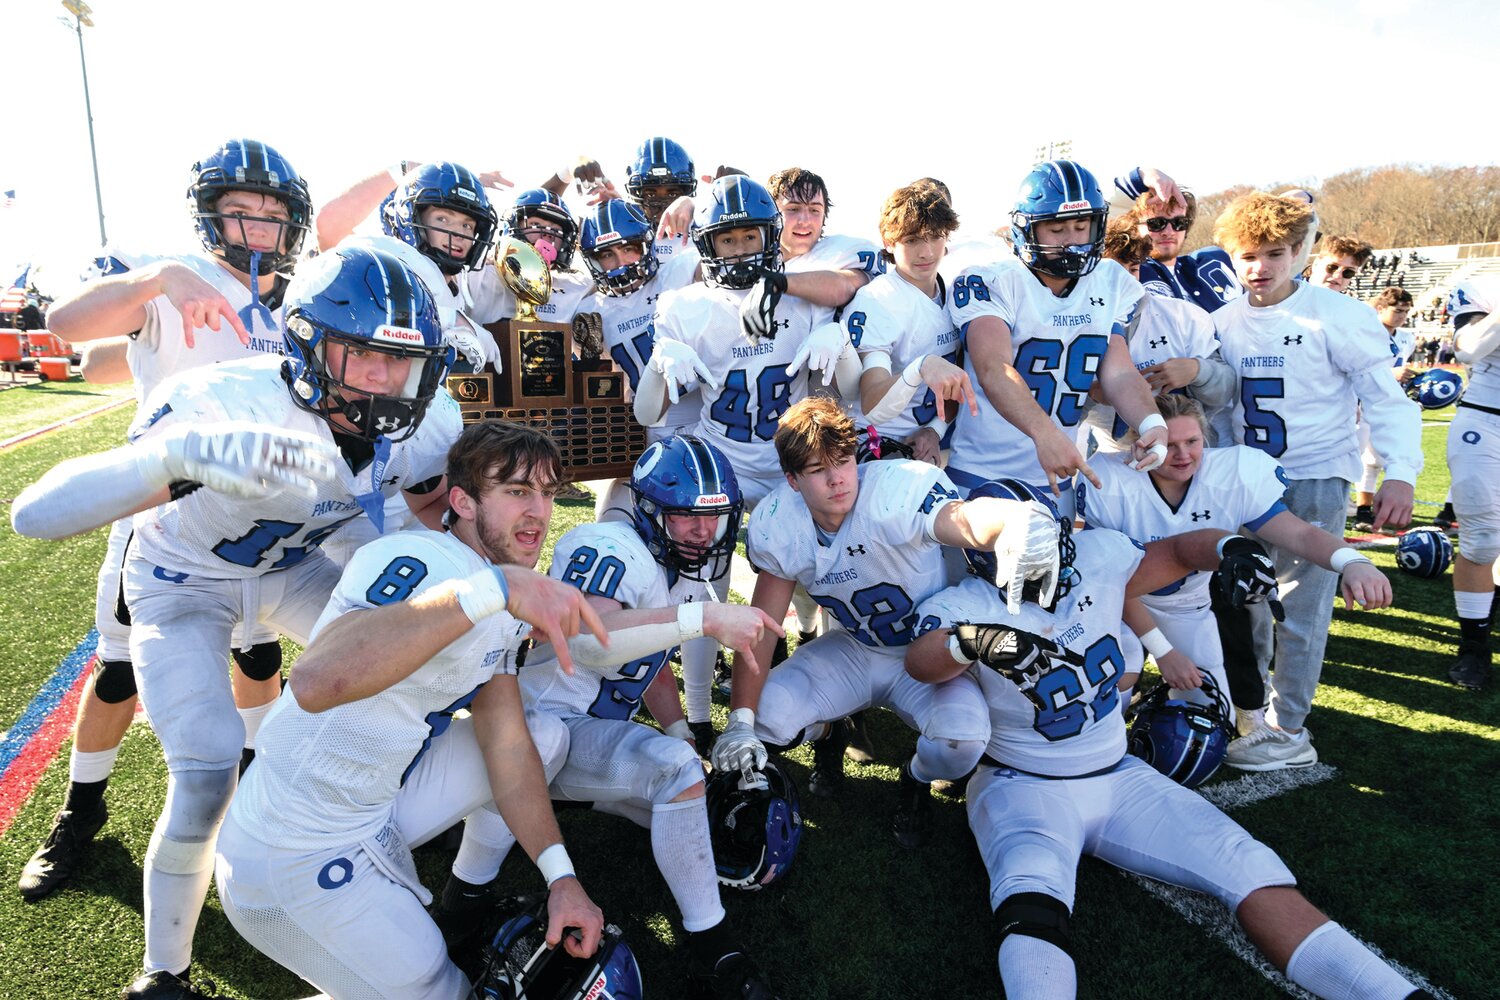 Quakertown players celebrate with the trophy.